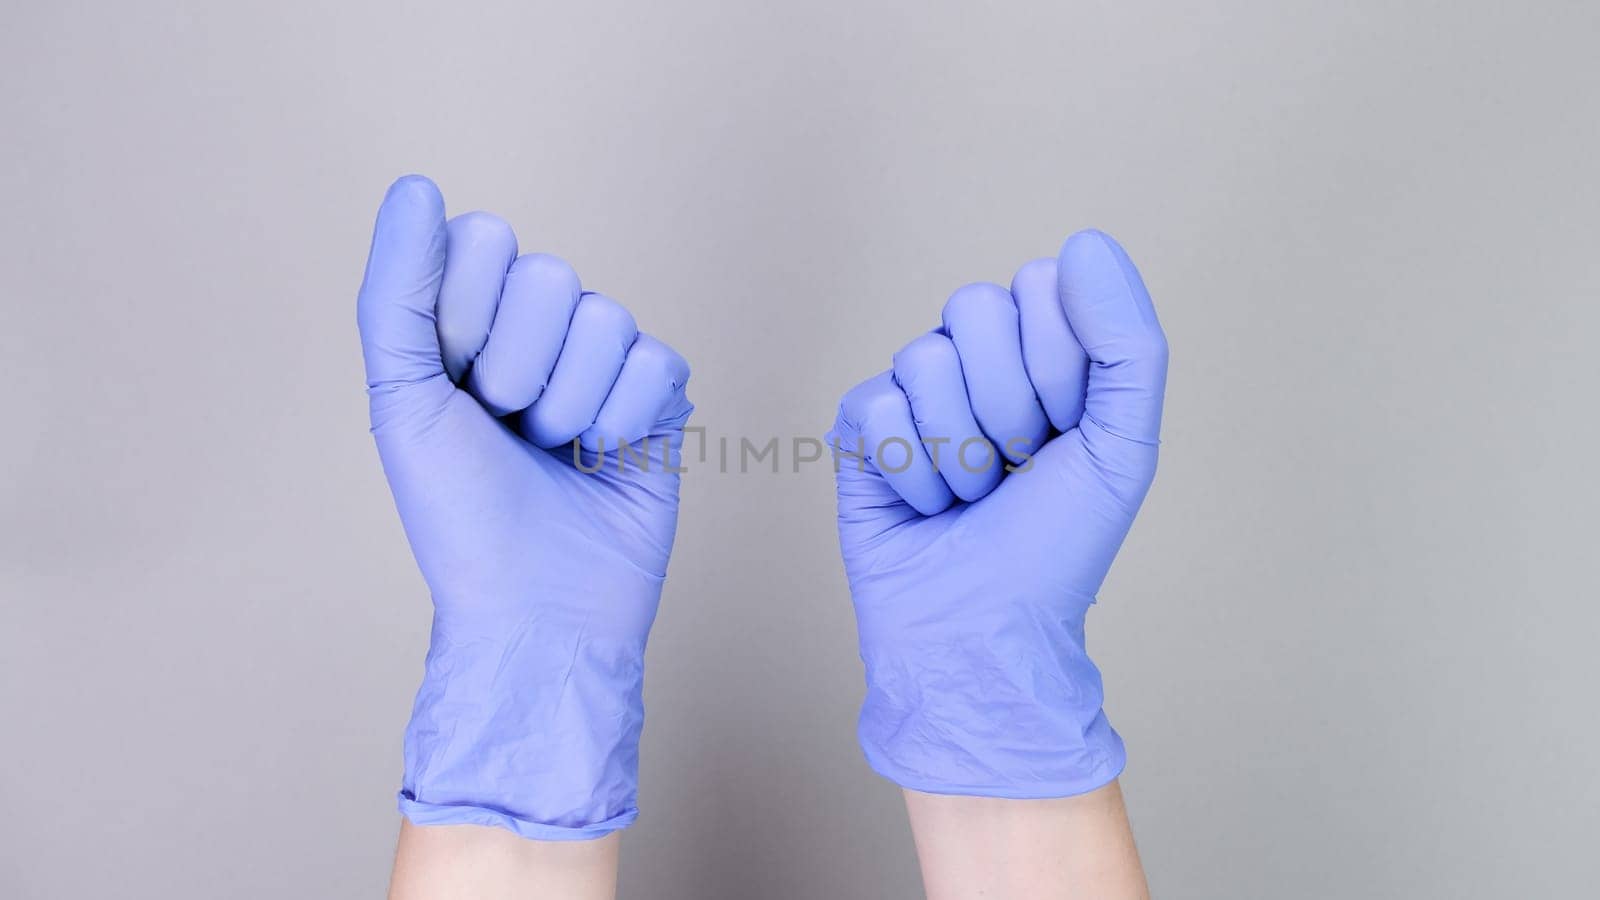 Hands in blue gloves of doctor or nurse over grey background with copy space. Medical gloves. by JuliaDorian